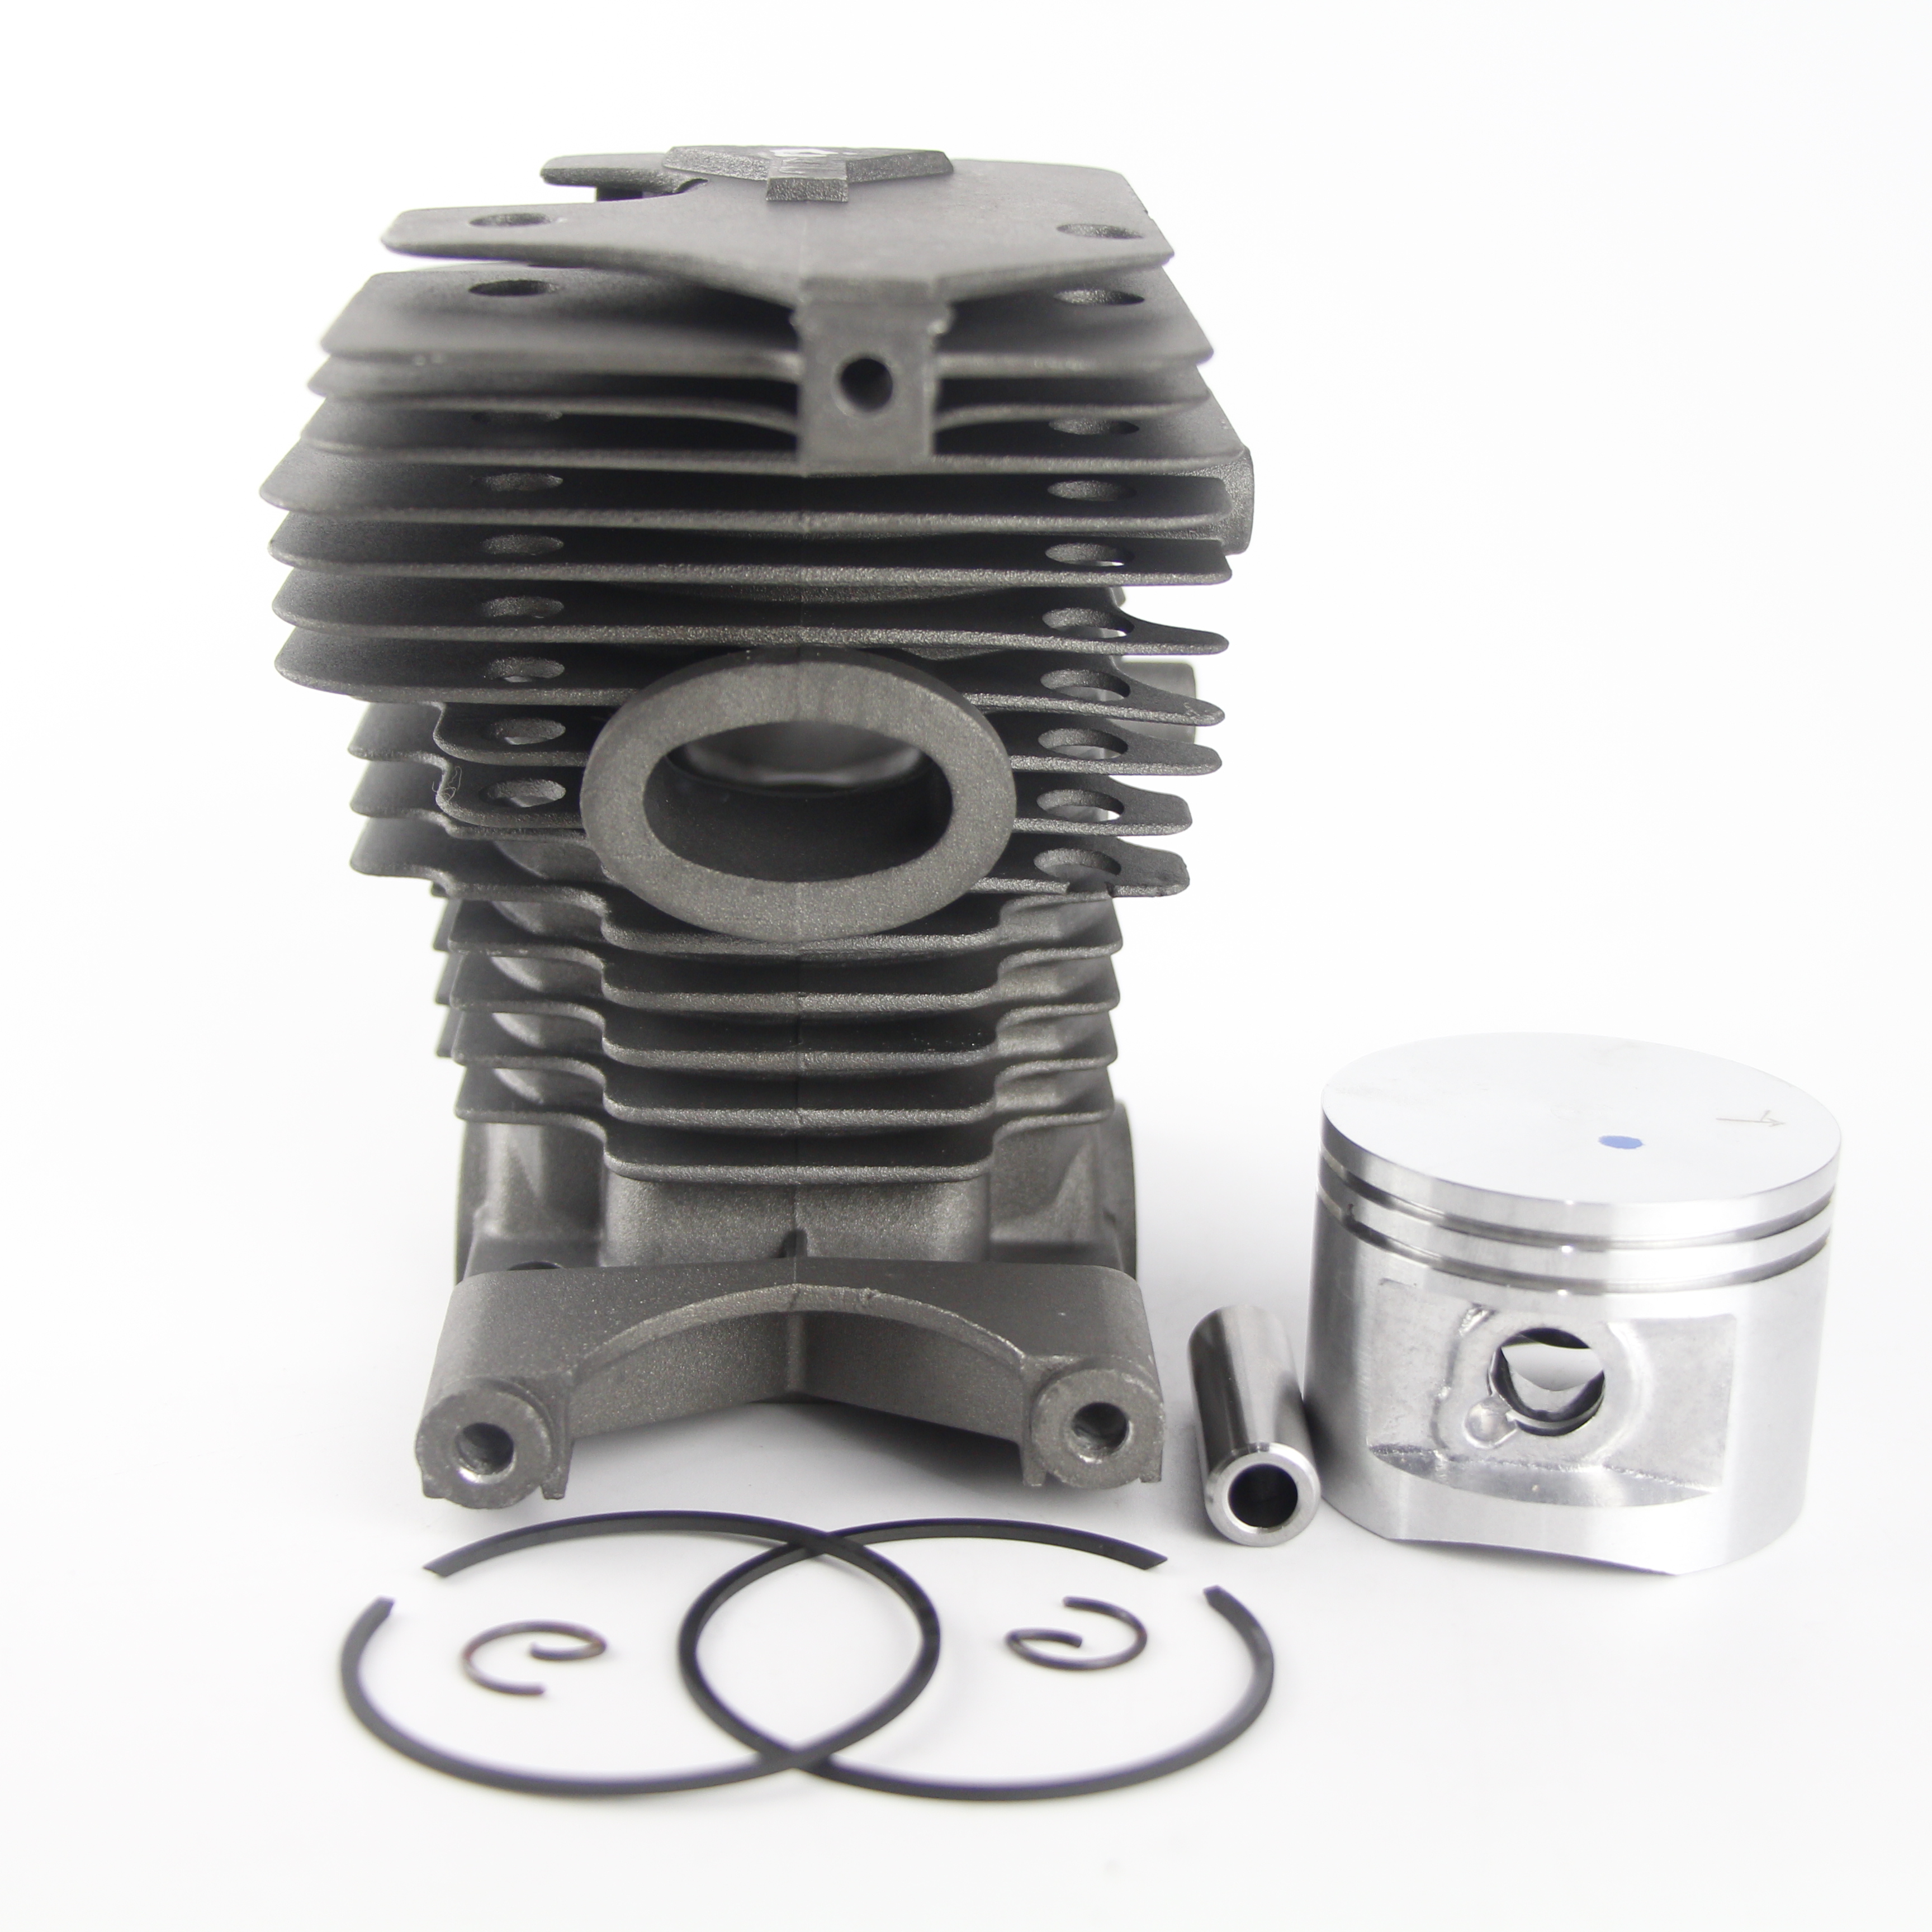 Buy Mtanlo 46mm Cylinder Piston Top End Kit Big Bore for Stihl